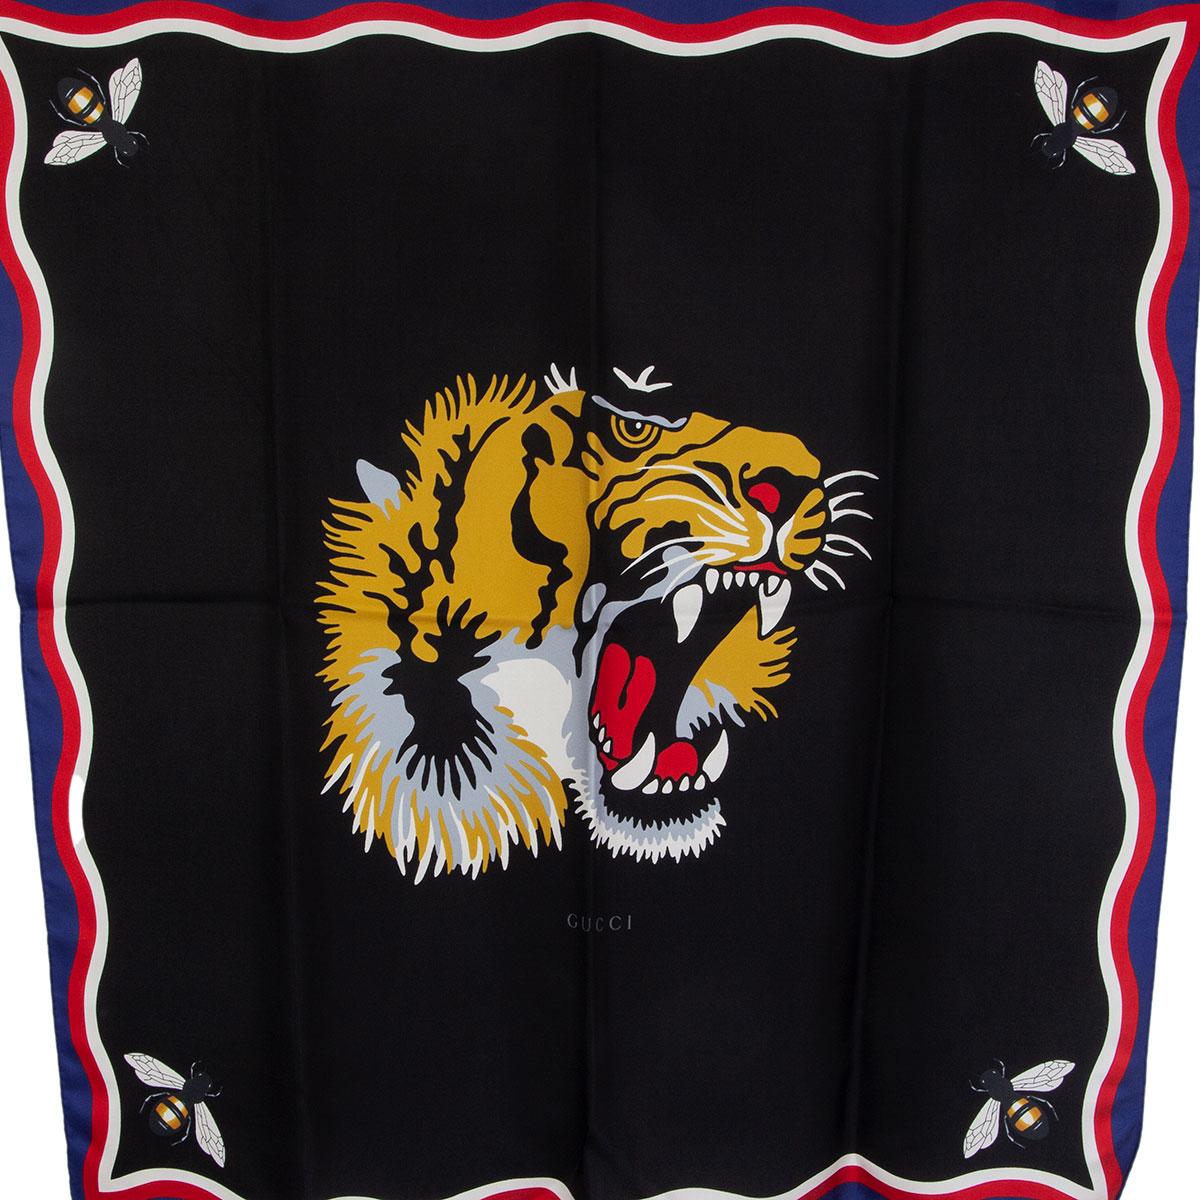 Gucci tiger & bee scarf in black, red, blue, white, grey and ochre silk twill (100%). Has been worn and is in excellent condition. 

Width 90cm (35.1in)
Length 90cm (35.1in)
